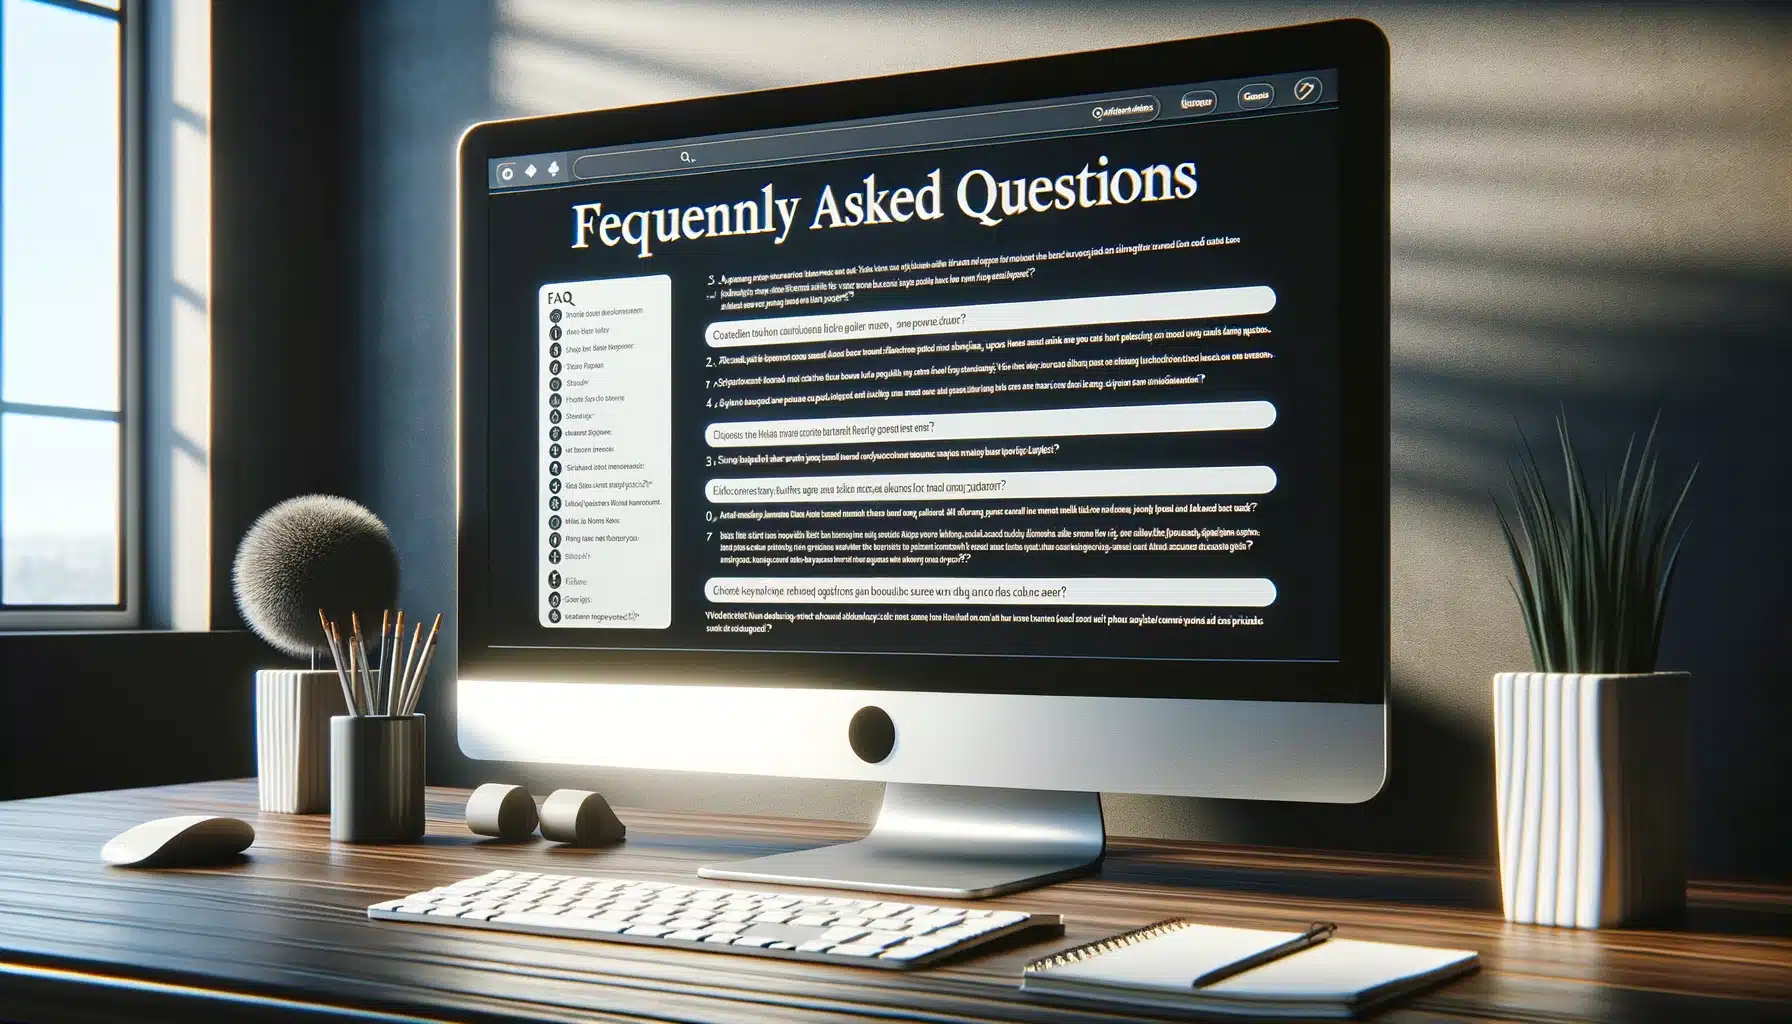 Computer monitor in an office displaying an FAQ section with a list of questions and answers.